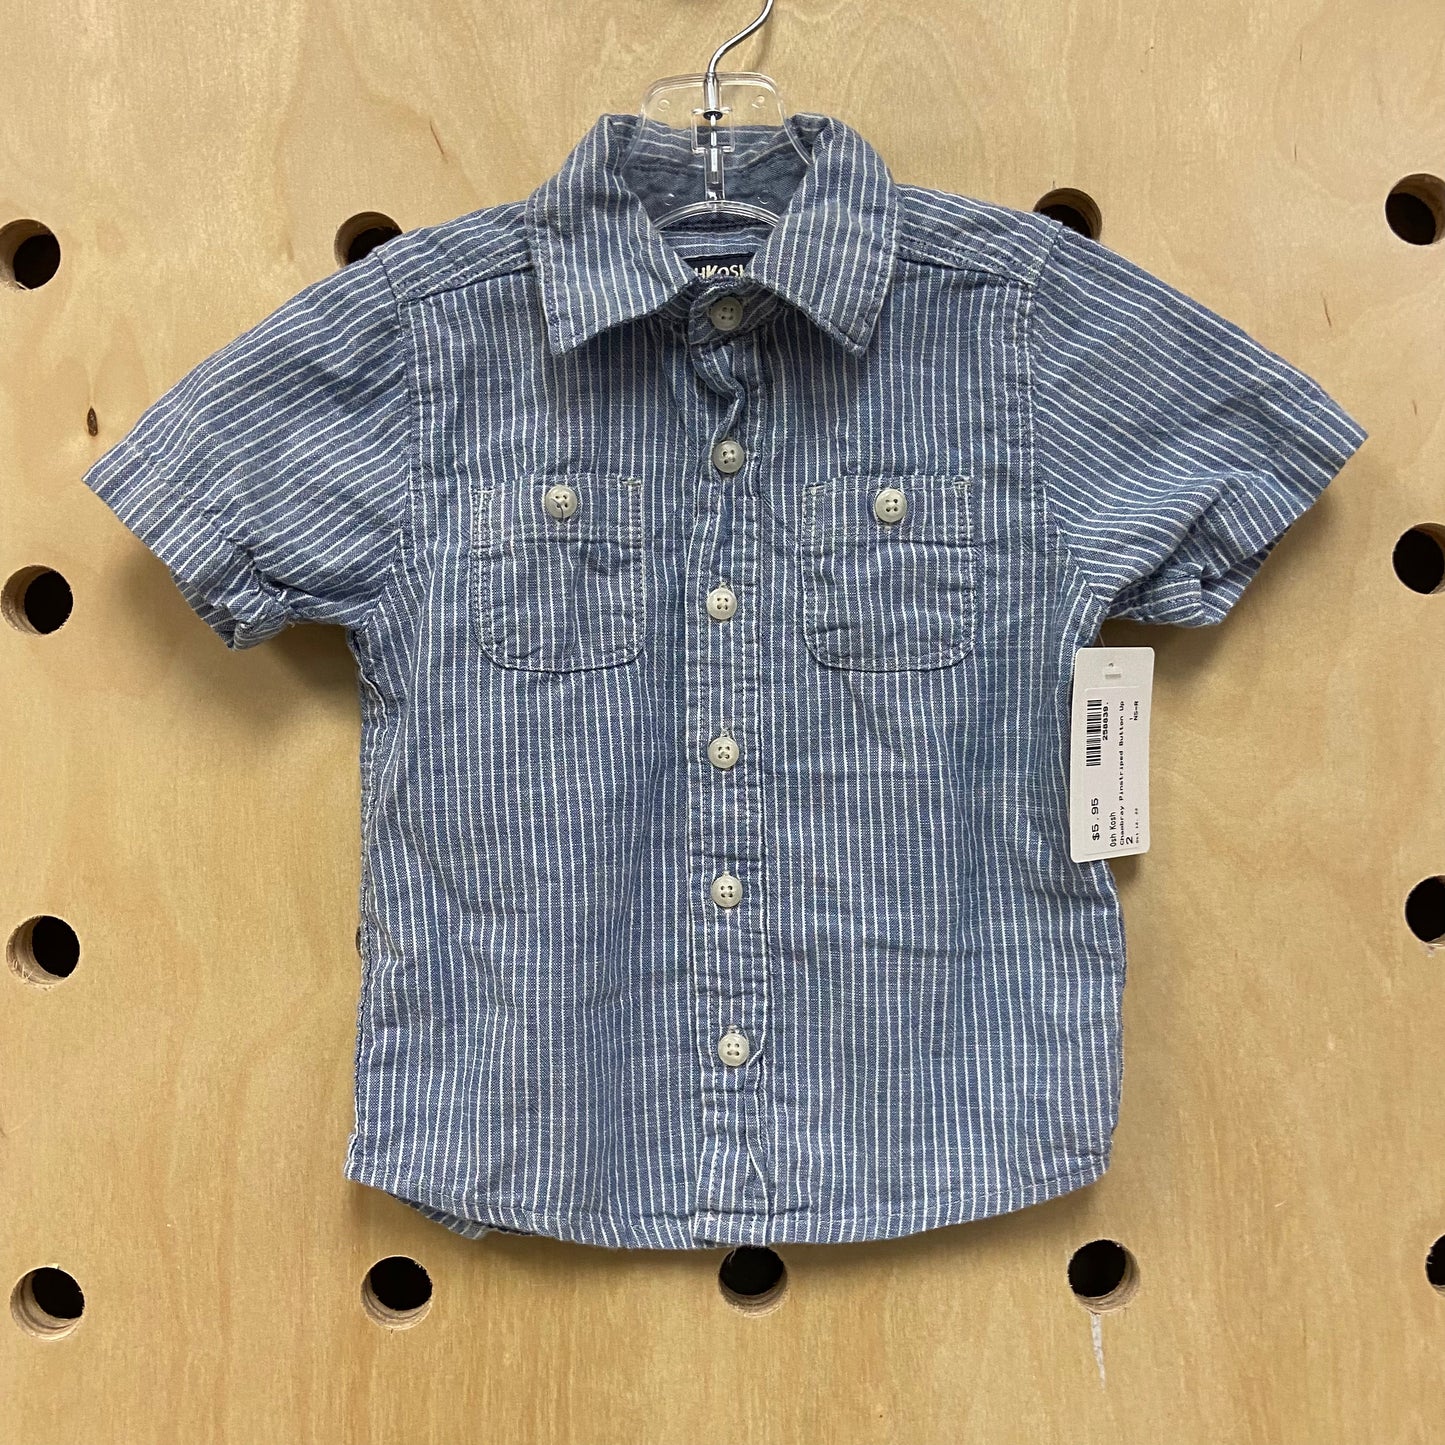 Chambray Pinstriped Button Up